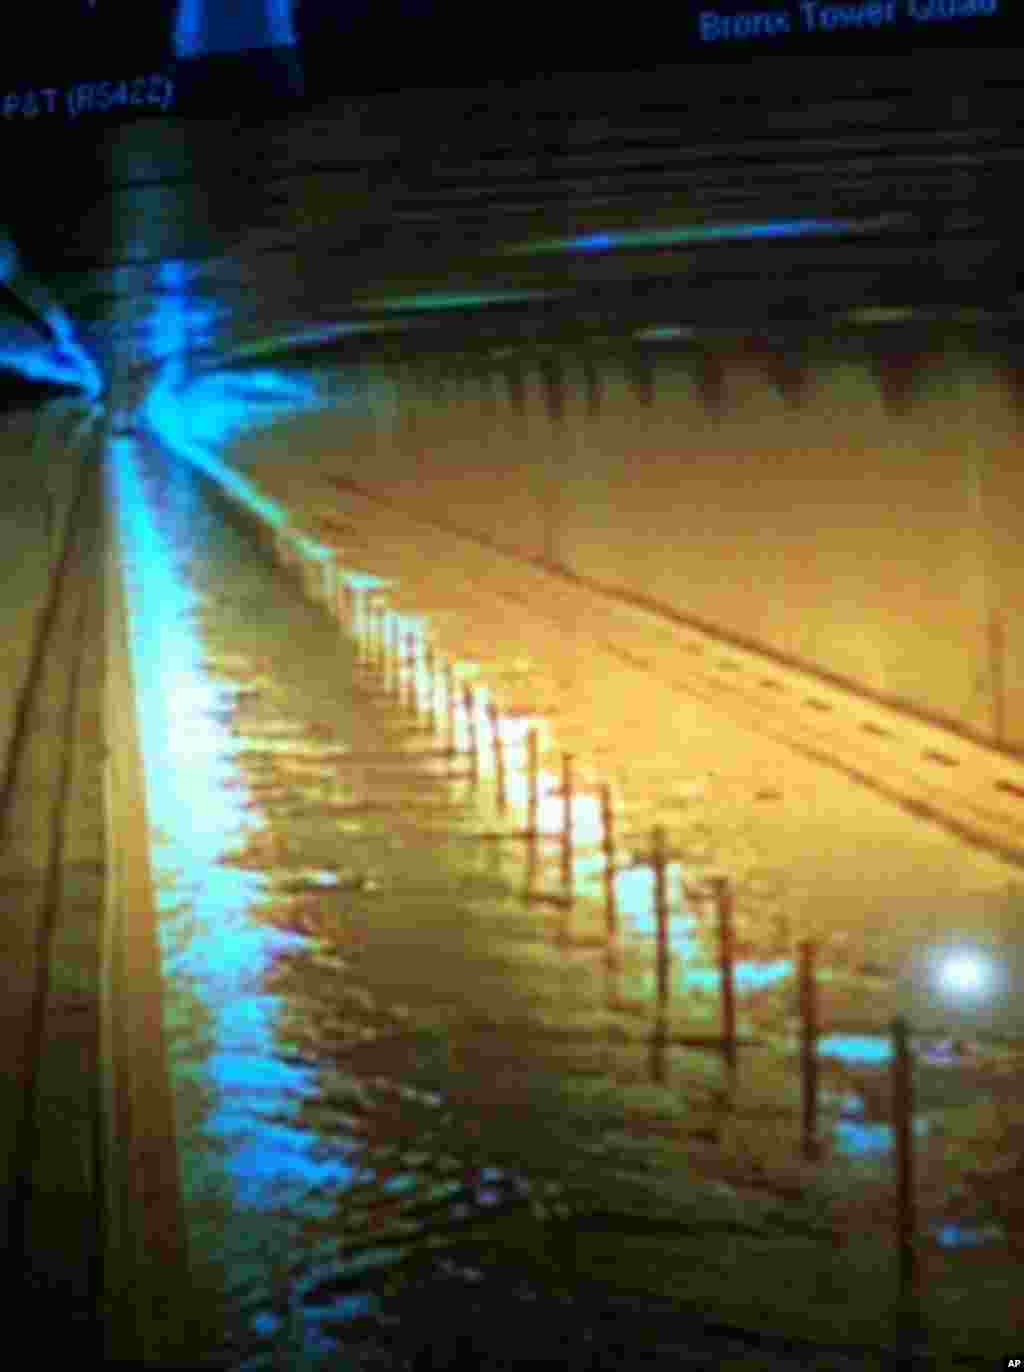 This photo provided by MTA Bridges and Tunnels shows floodwaters from Sandy entering the Hugh L. Carey Tunnel (former Brooklyn-Battery Tunnel), which was closed on Monday, Oct. 29, 2012. (AP Photo/ MTA Bridges and Tunnels)